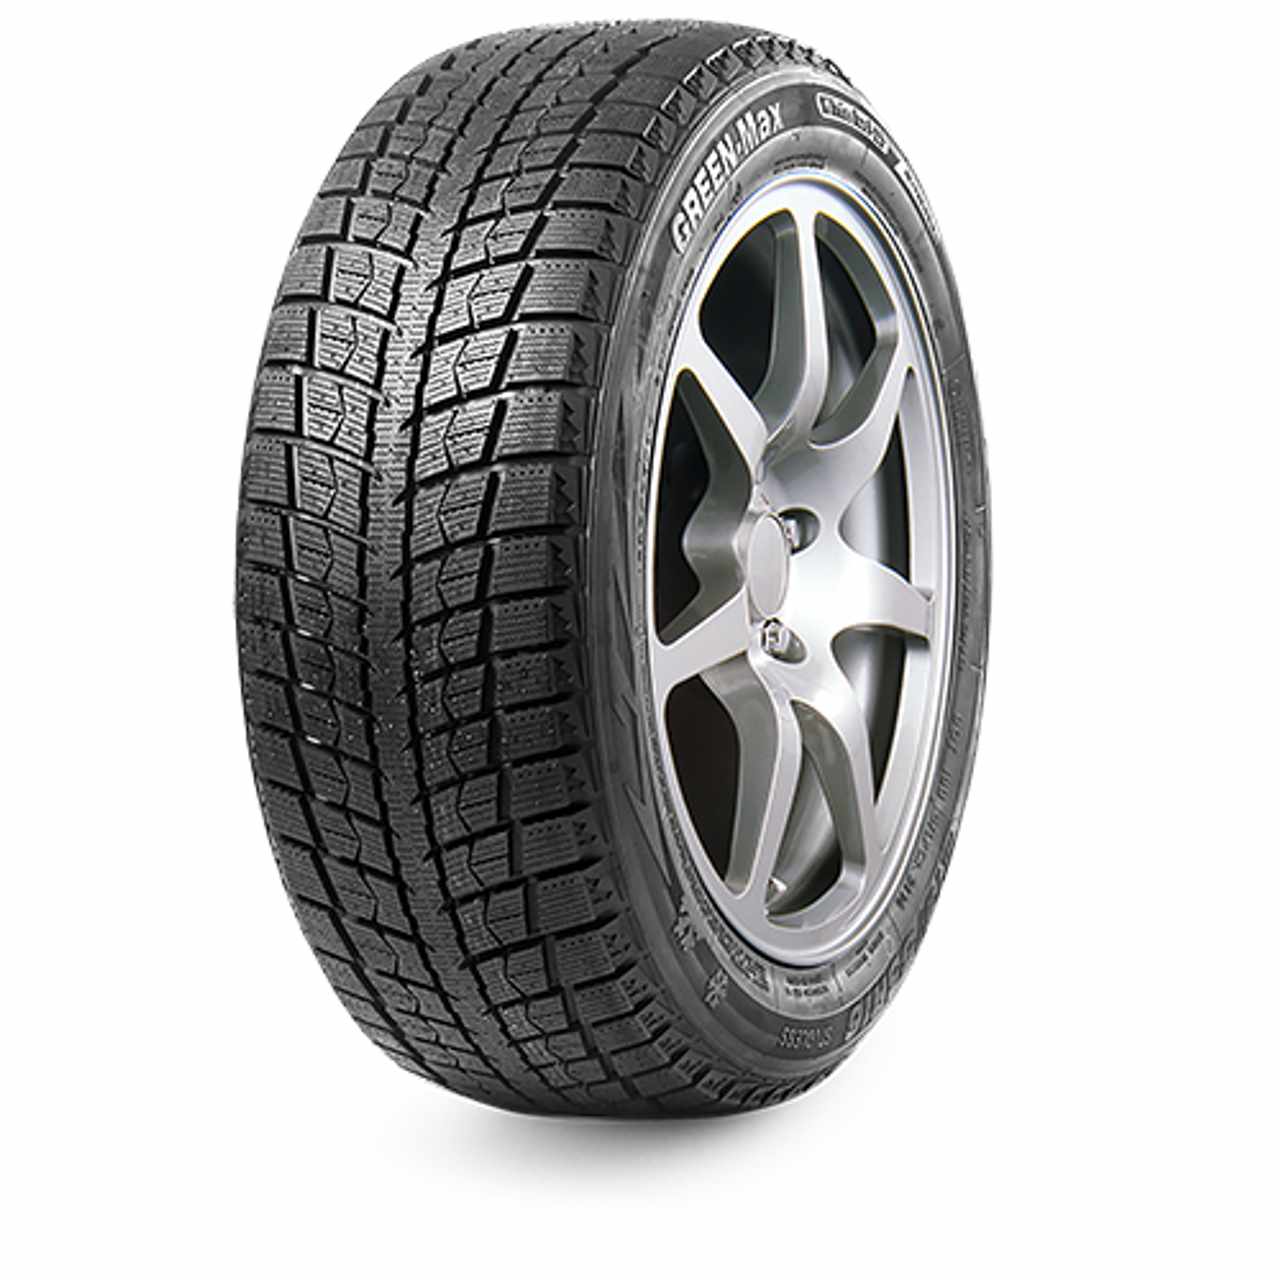 LINGLONG GREEN-MAX WINTER ICE I-15 SUV 275/35R19 96T NORDIC COMPOUND MFS BSW